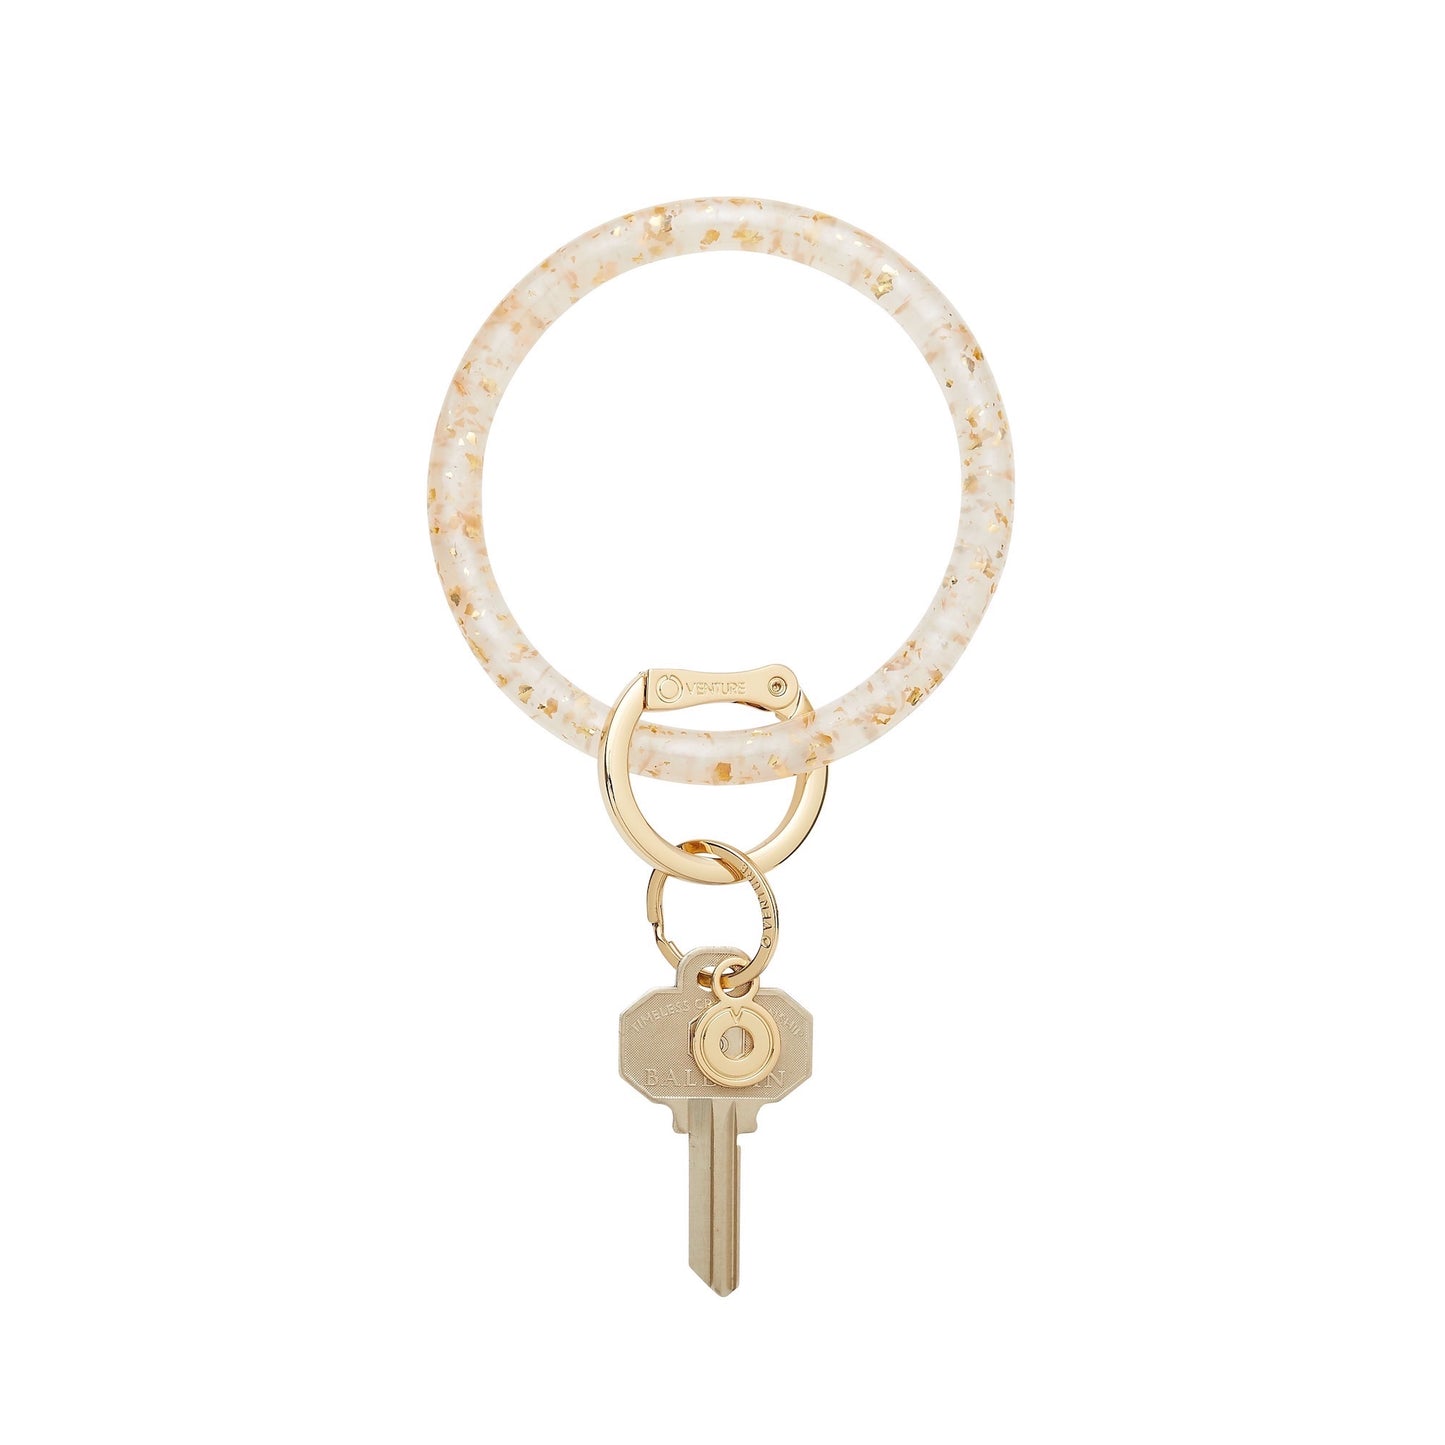 Clear Resin Big O Key Ring with 24k gold specs with gold locking clasp